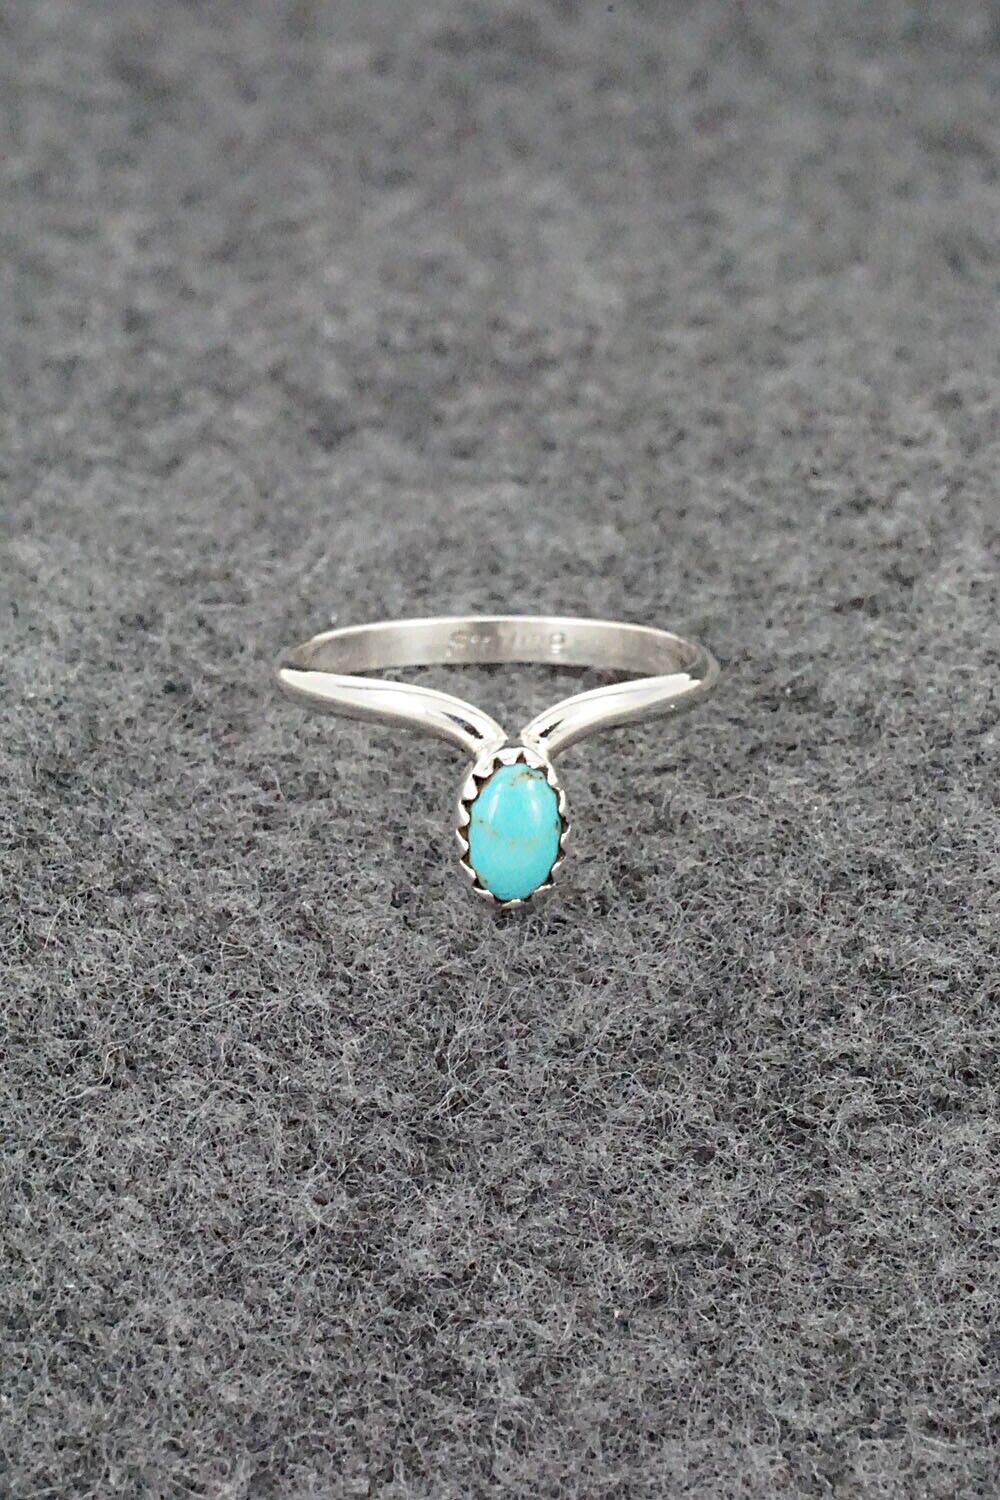 Turquoise & Sterling Silver Ring - Hiram Largo - Size 9